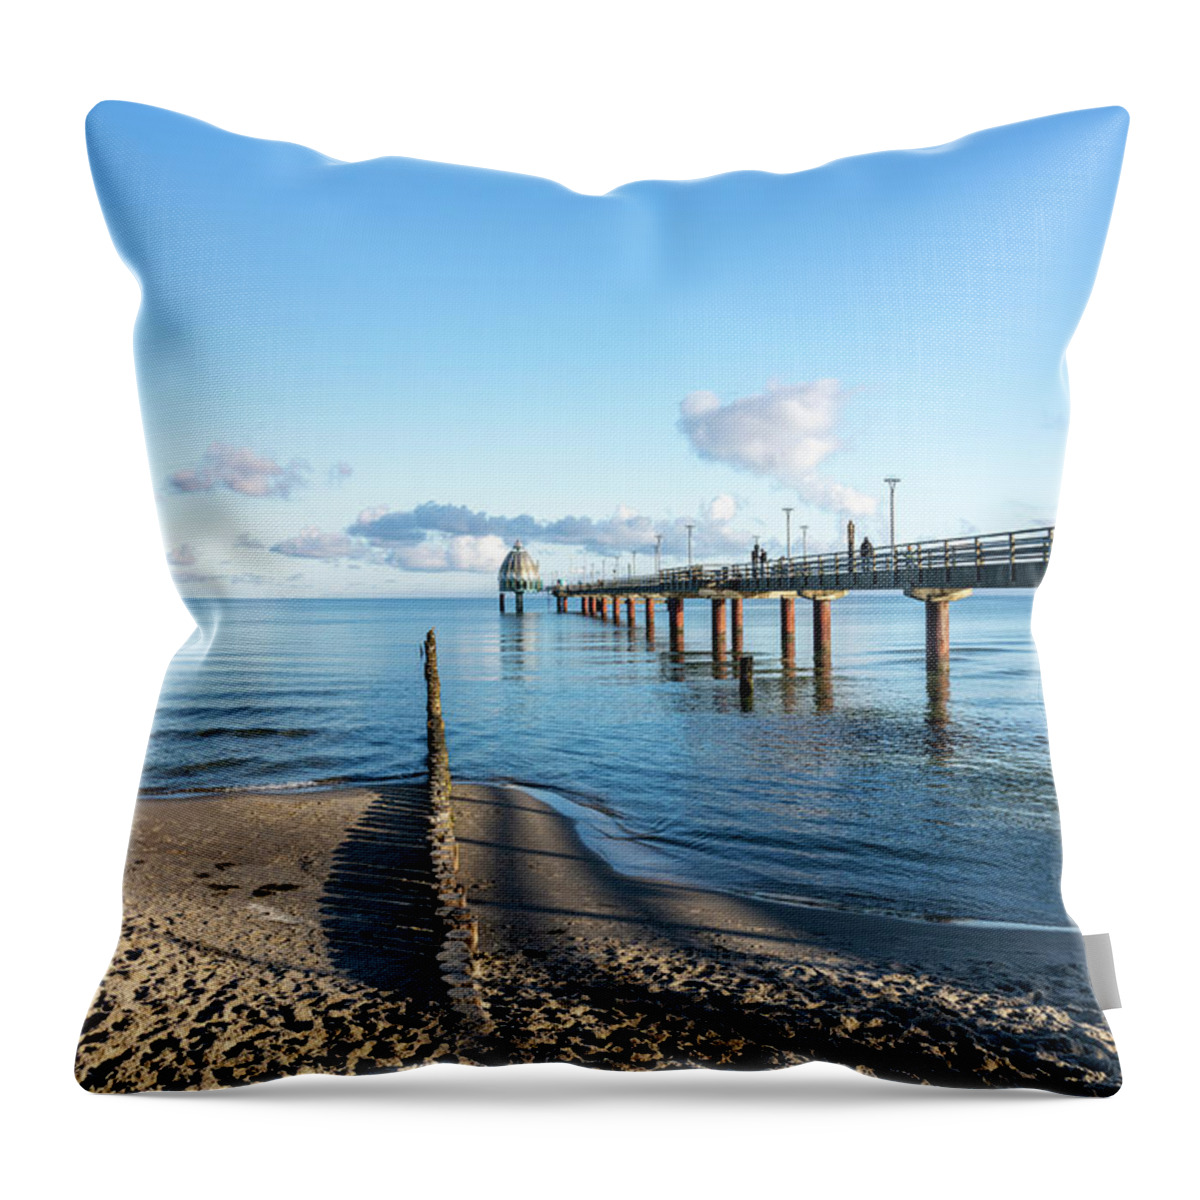 Ip_71342215 Throw Pillow featuring the photograph Morning Mood On The Baltic Sea Beach Of The Baltic Sea Spa Zingst, Fischland-darss-zingst, Mecklenburg-western Pomerania, Germany. by Franz Subauer